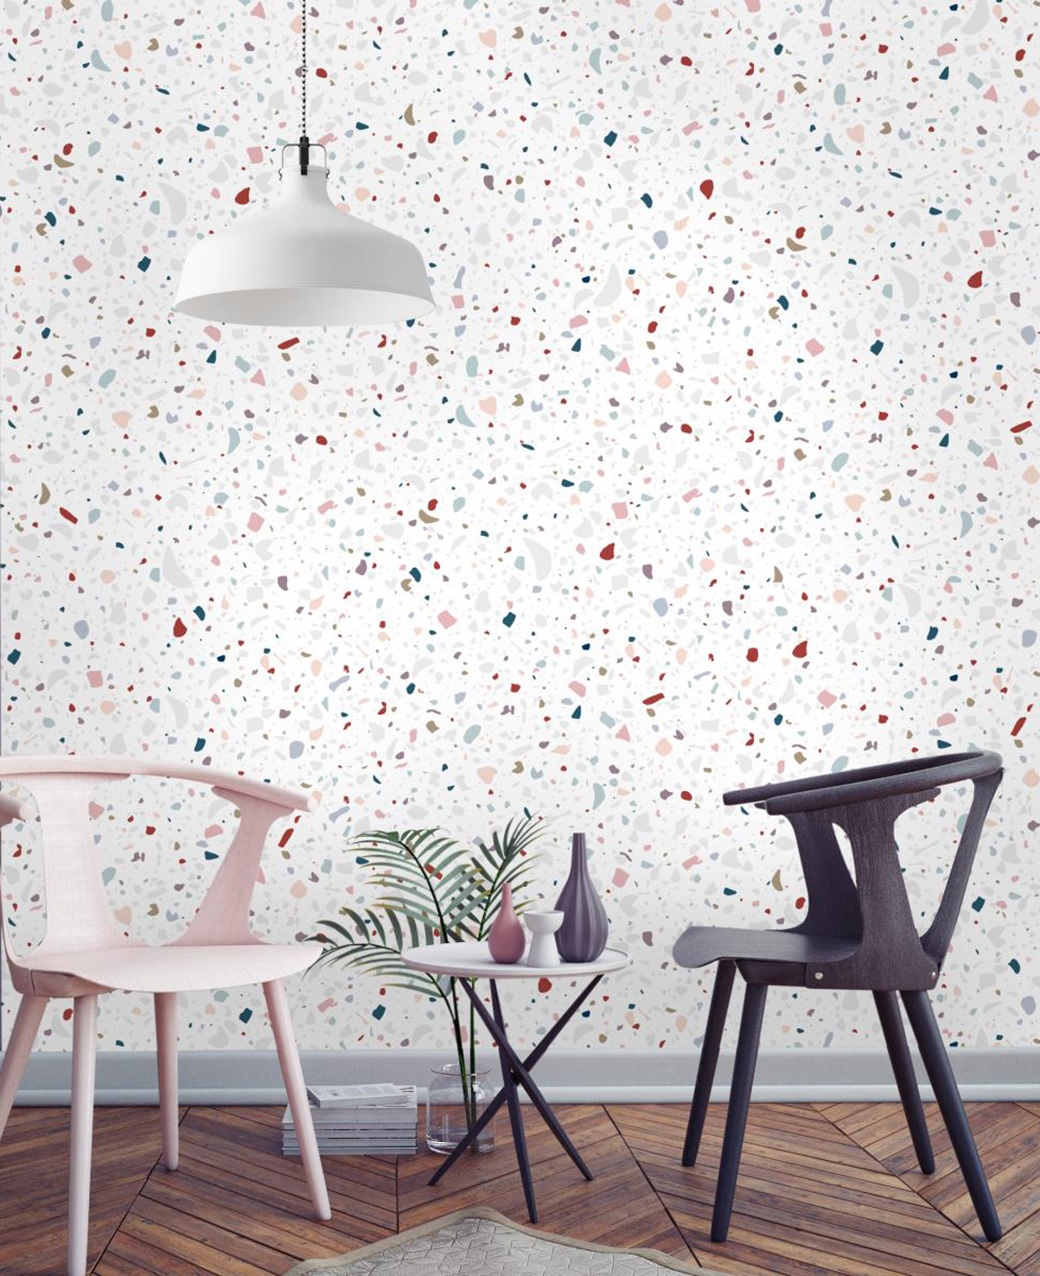 Dezign Lover Blog : Chic and sparkling: the terrazzo trend is back